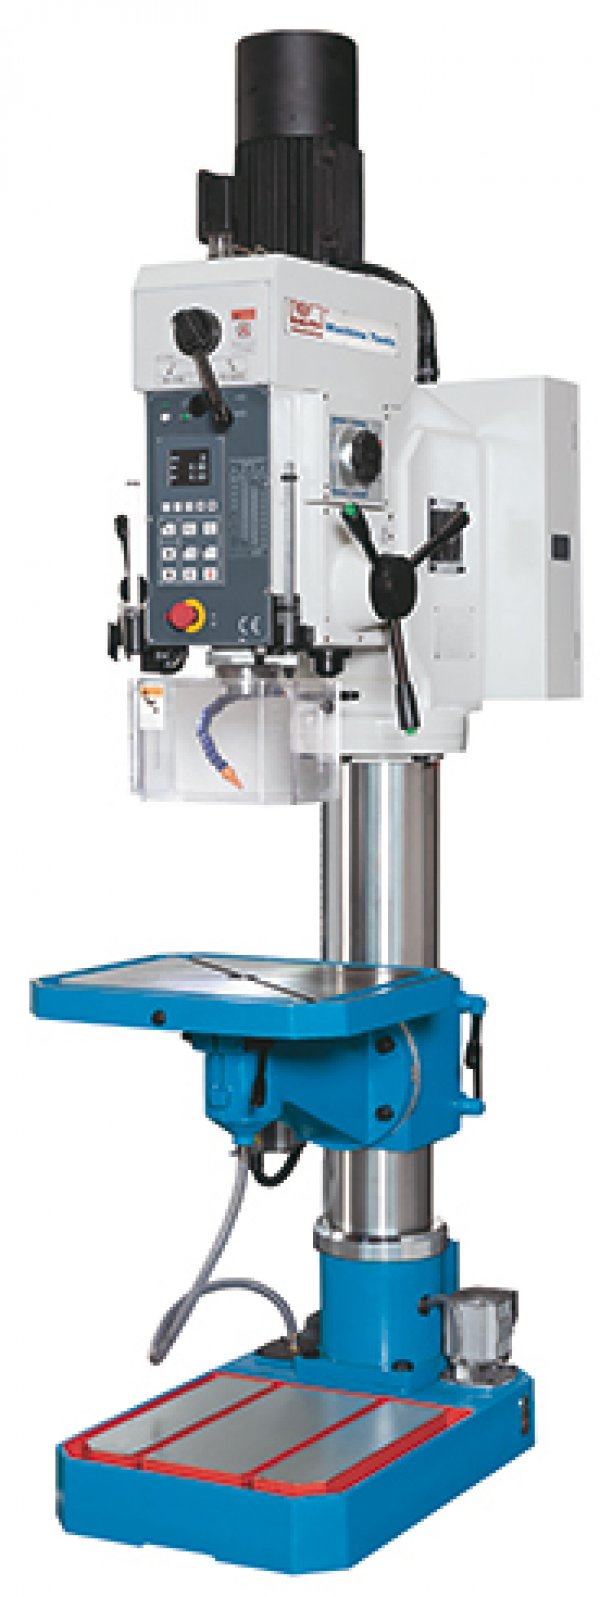 SSB 50 F Super - Best selling drill press with digital display and many standard features